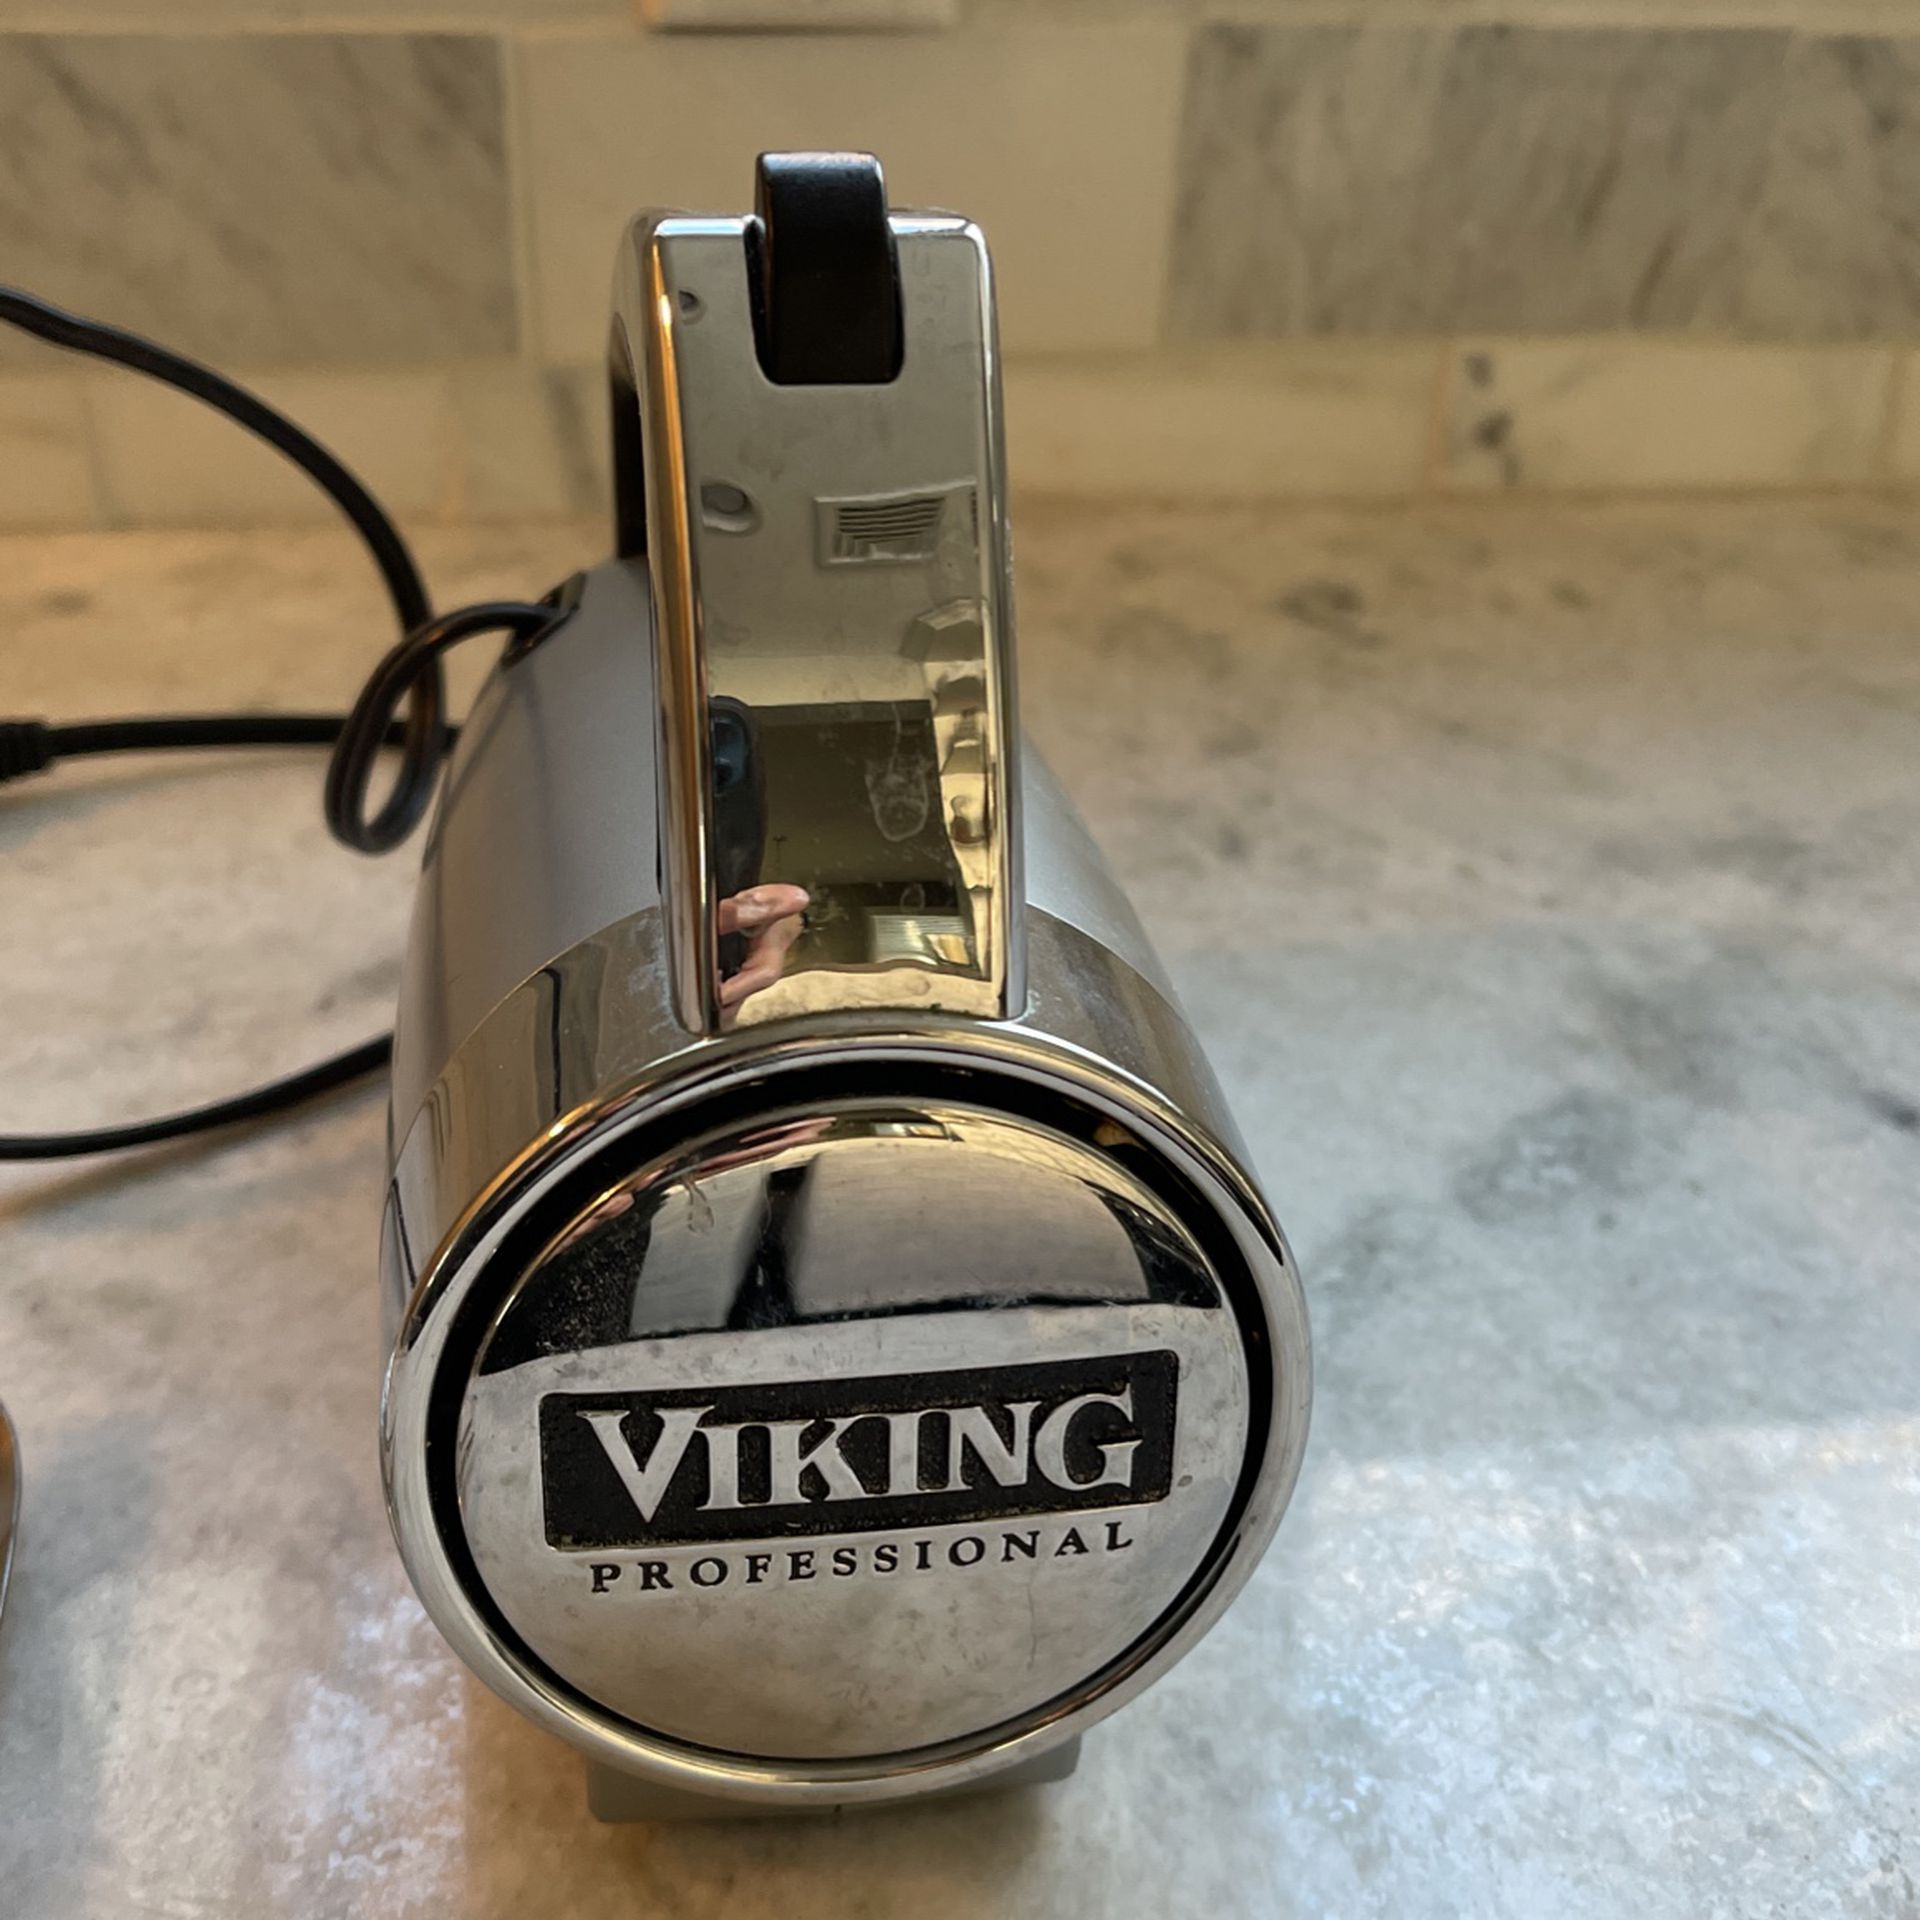 Viking 5-Speed Hand Mixer Review -  - Recipes